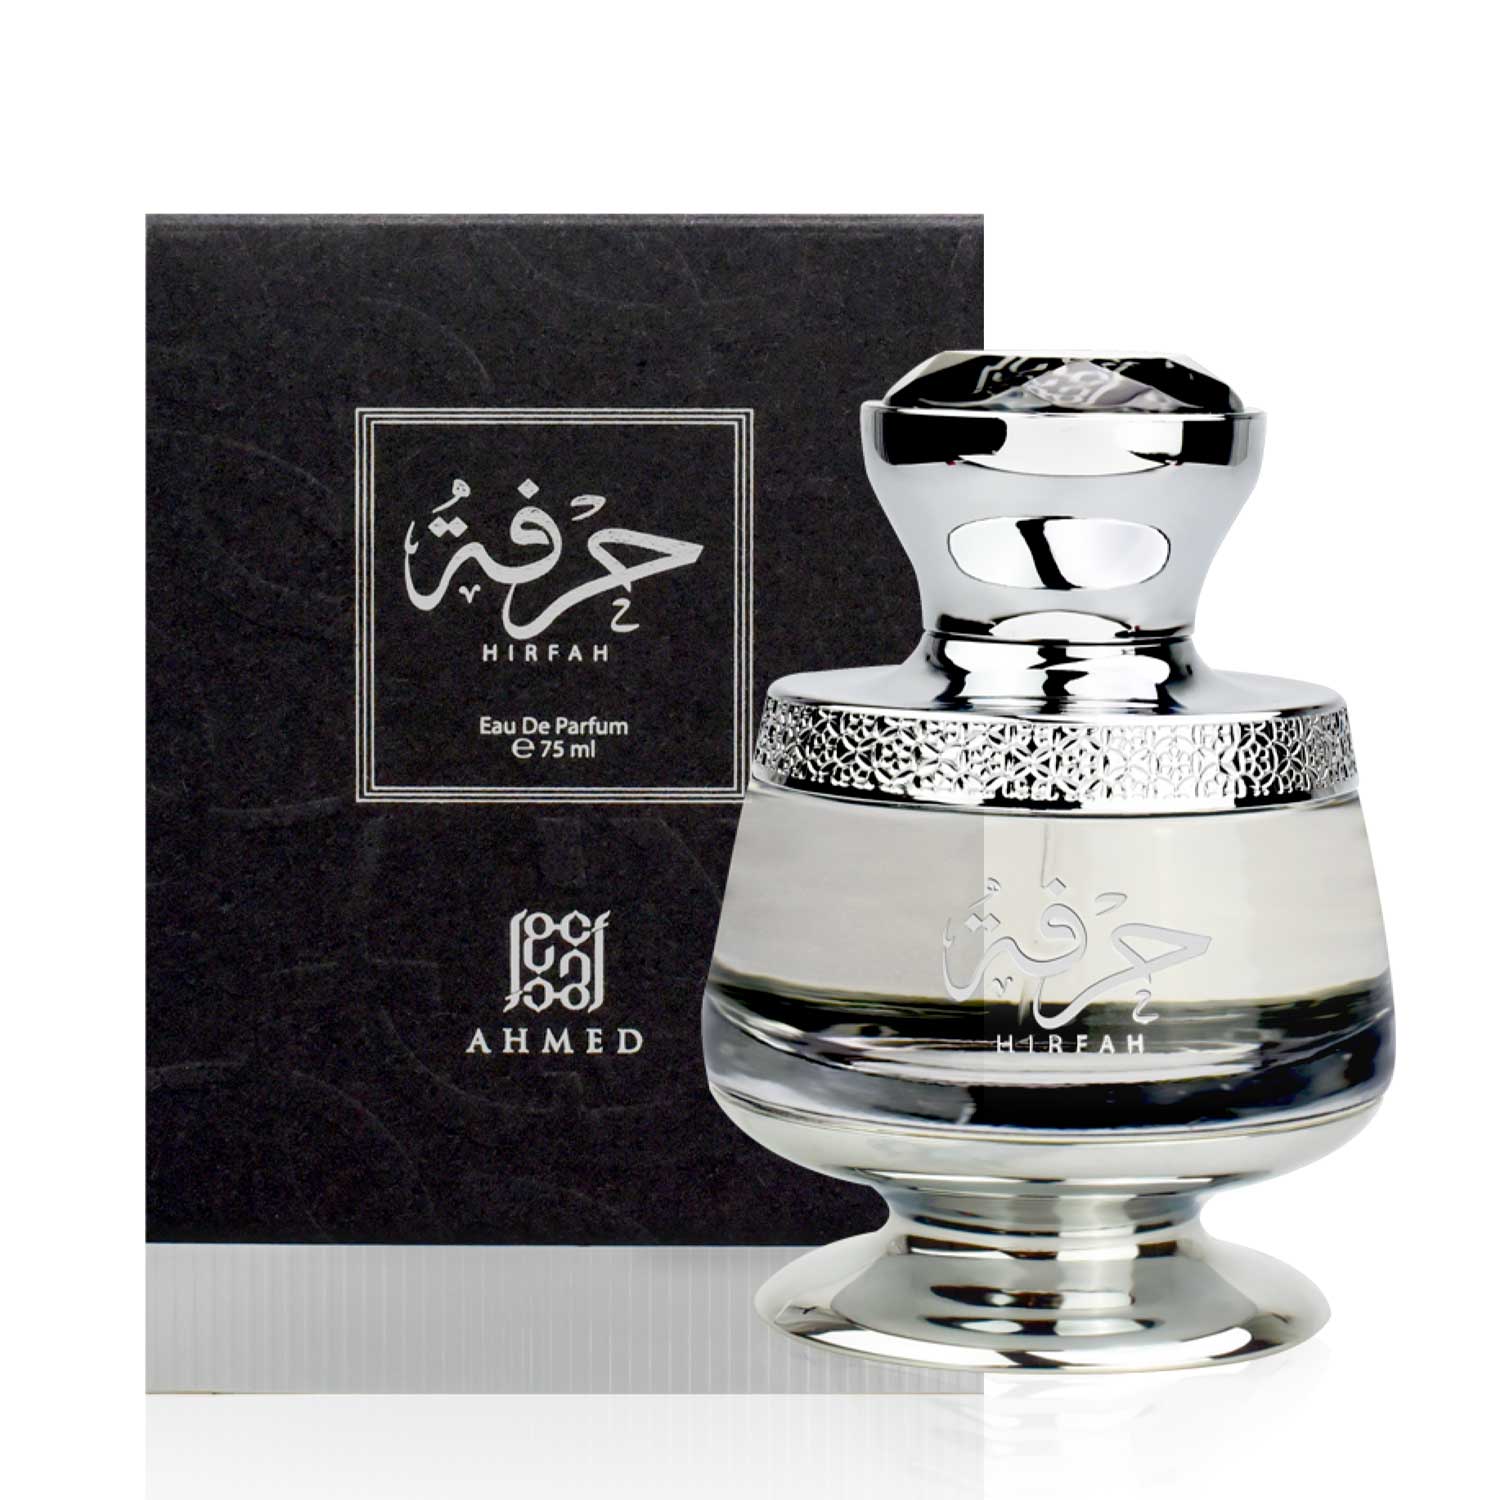 AHMED Oud & Roses 60mL Unisex Oriental Perfume for Men and Women a Woody  Floral Oriental Fragrance with Oudh (Frankincense) and Rose Accords